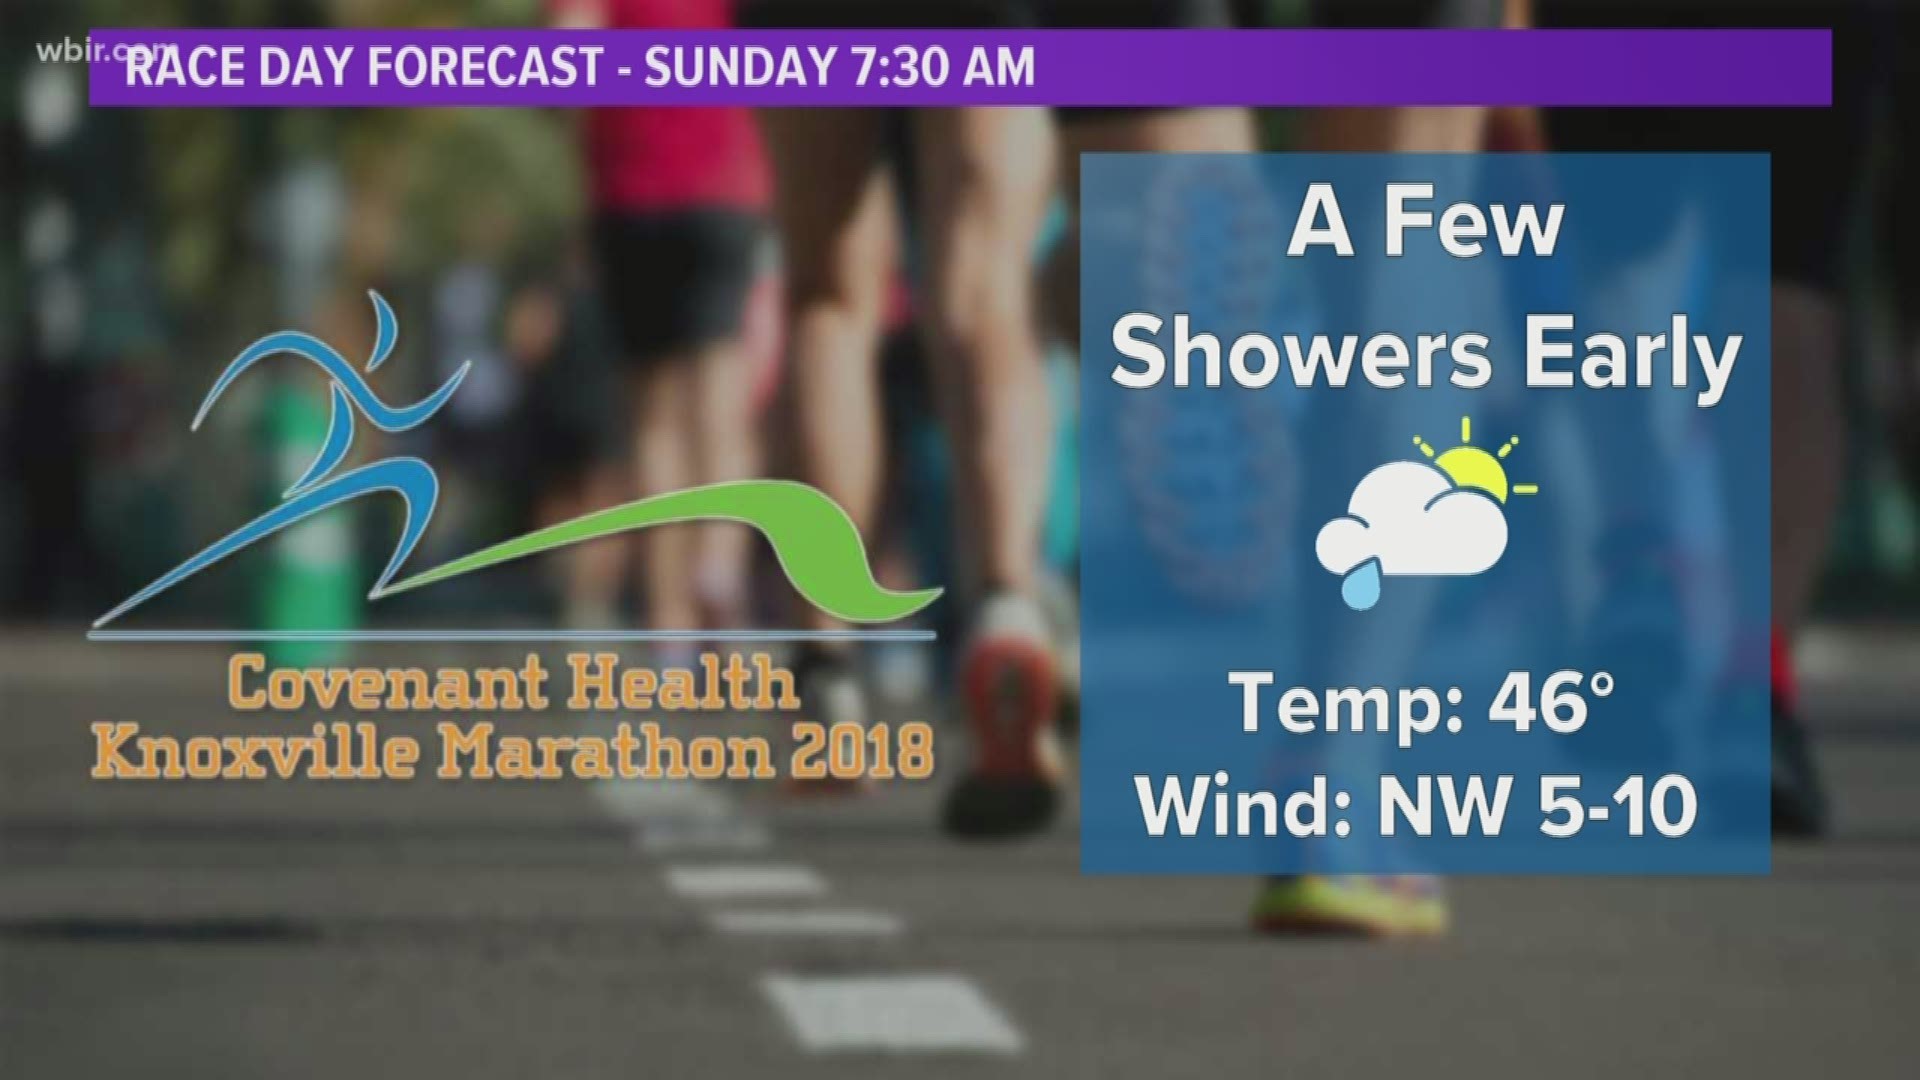 It will be cool and maybe wet early on for Sunday's 2018 Covenant Health Knoxville Marathon.